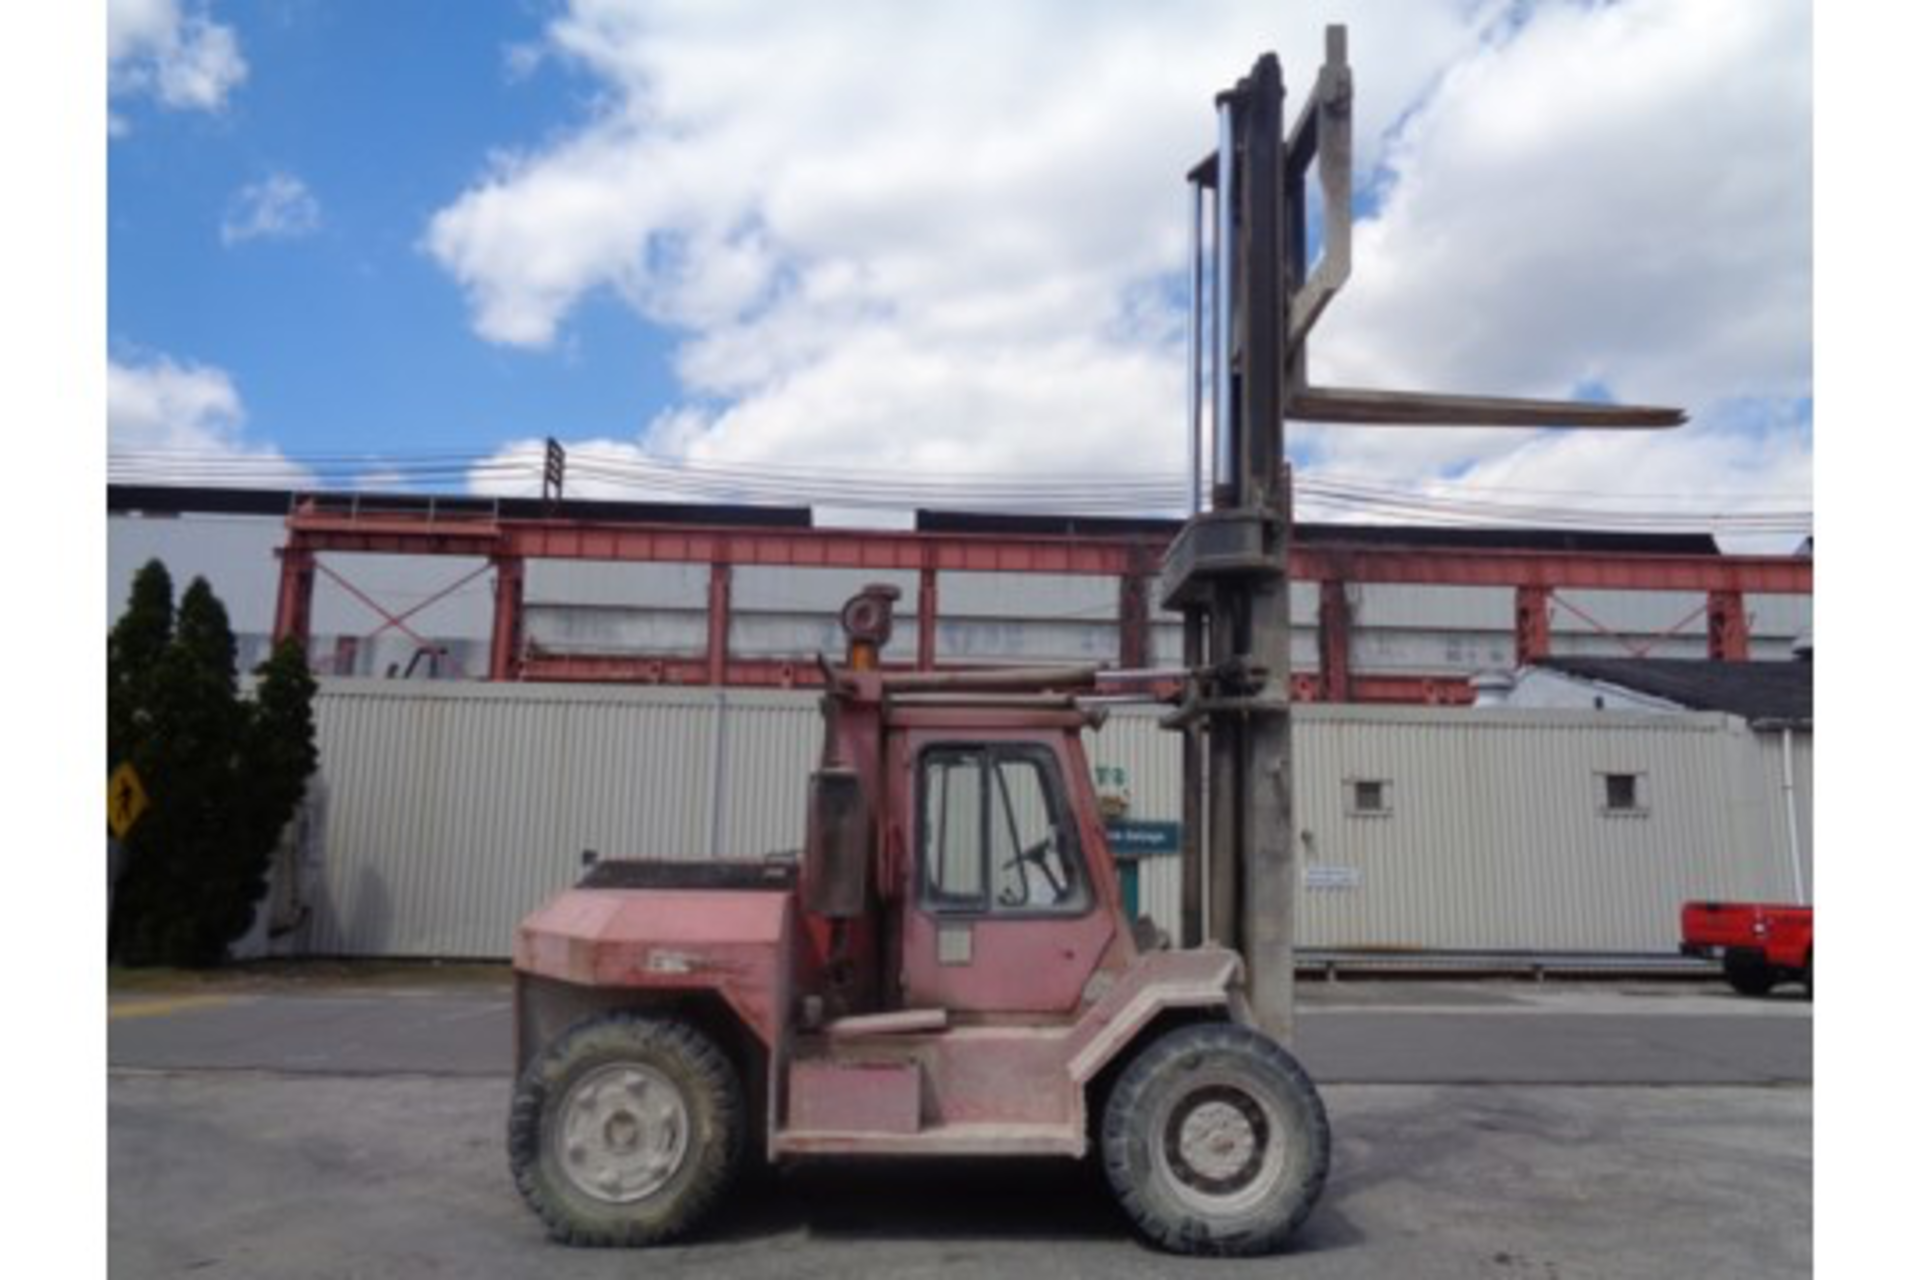 Taylor TE200S 20,000lb Forklift - Image 8 of 10